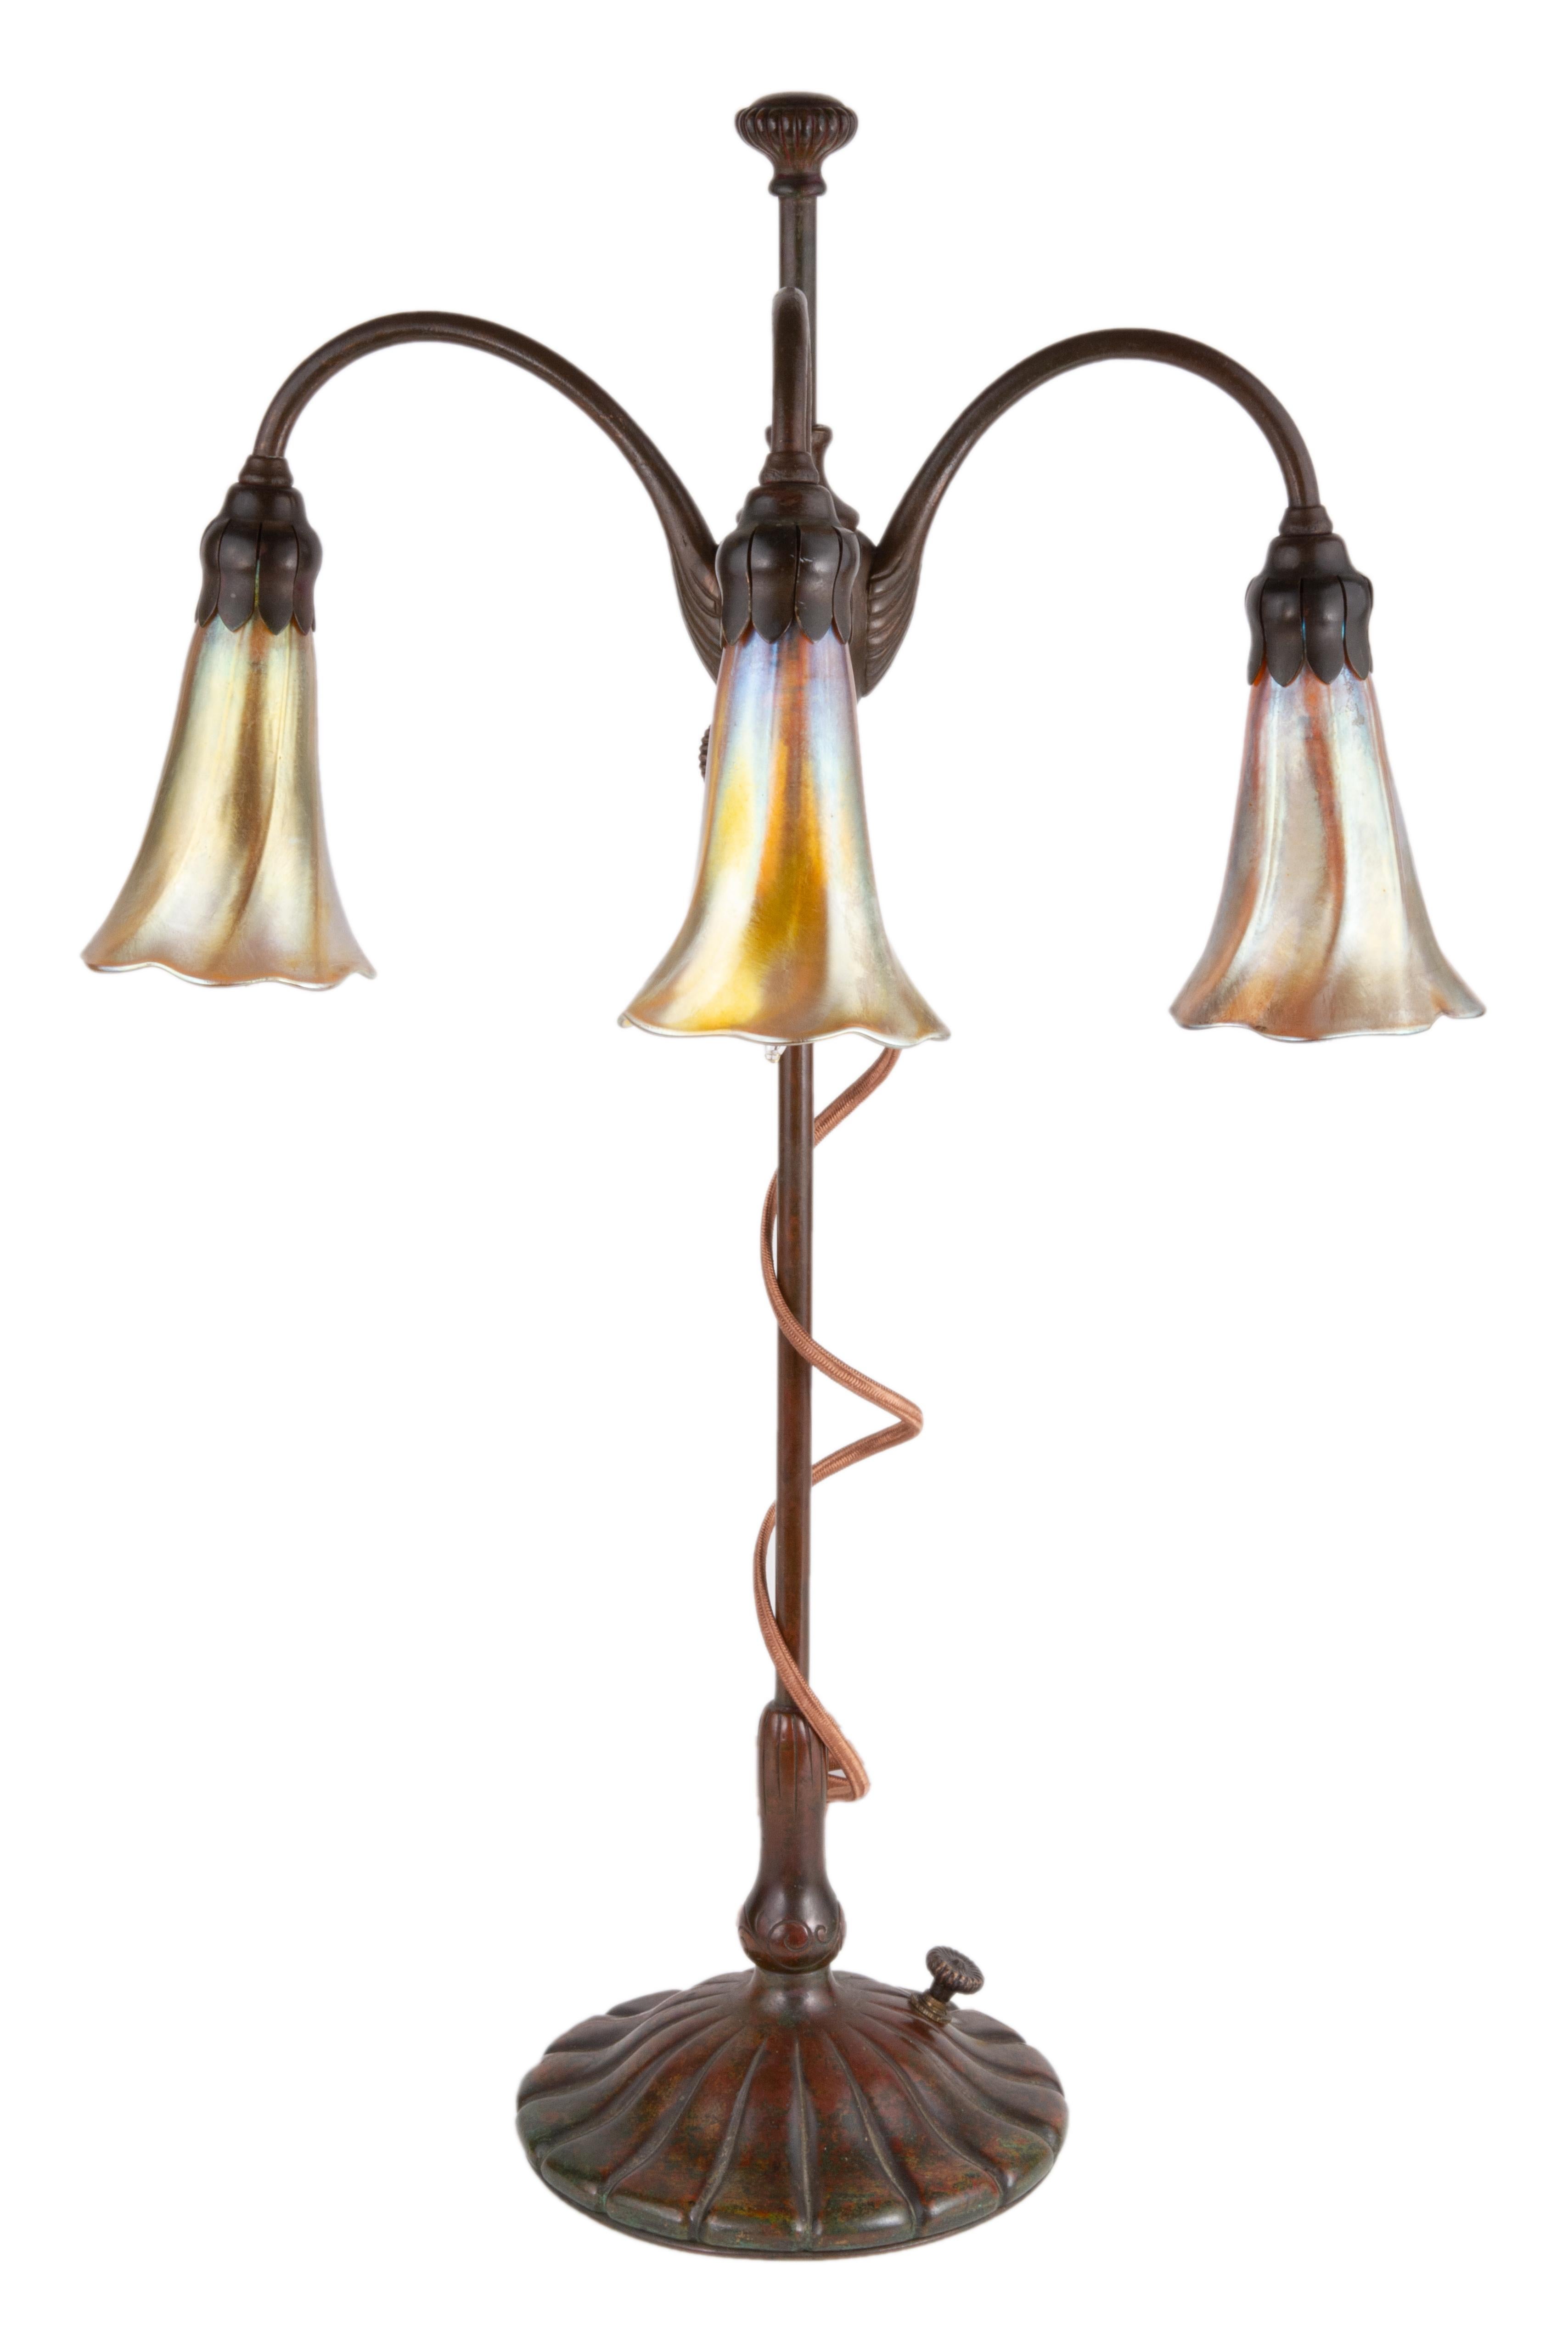 American Art Nouveau Tiffany Favrile Three-Light Lily Table Lamp by Tiffany Studios